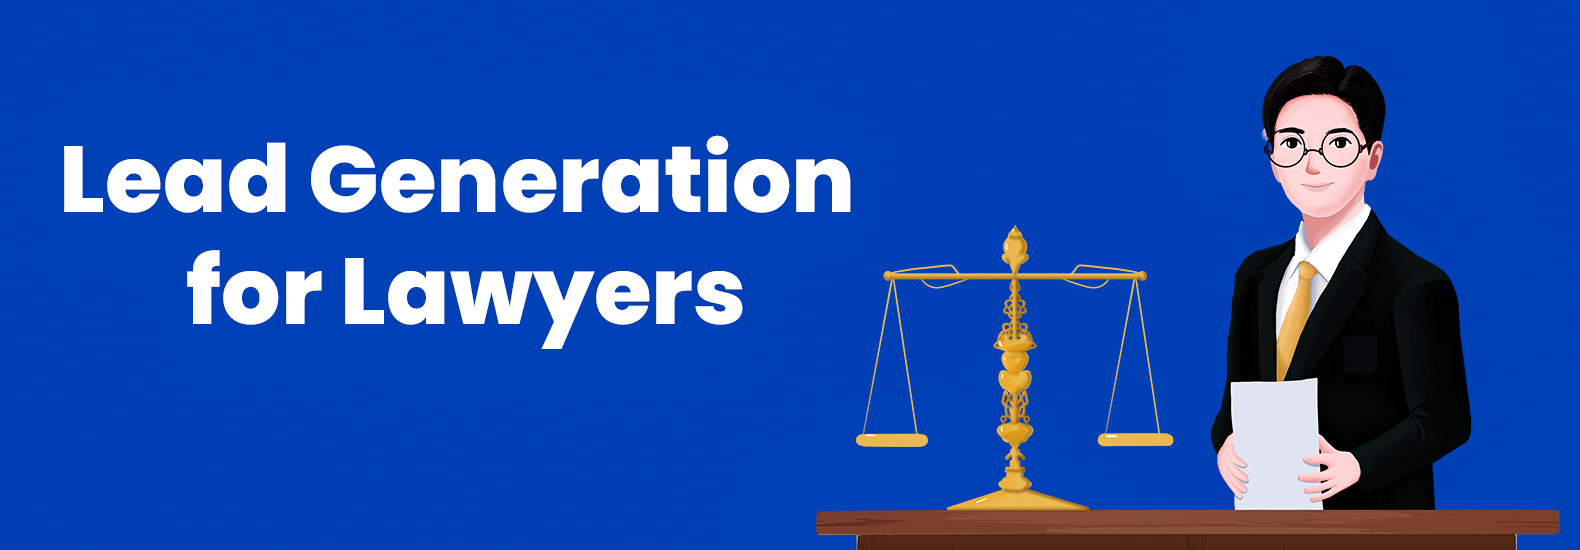 Lead Generation For Lawyers